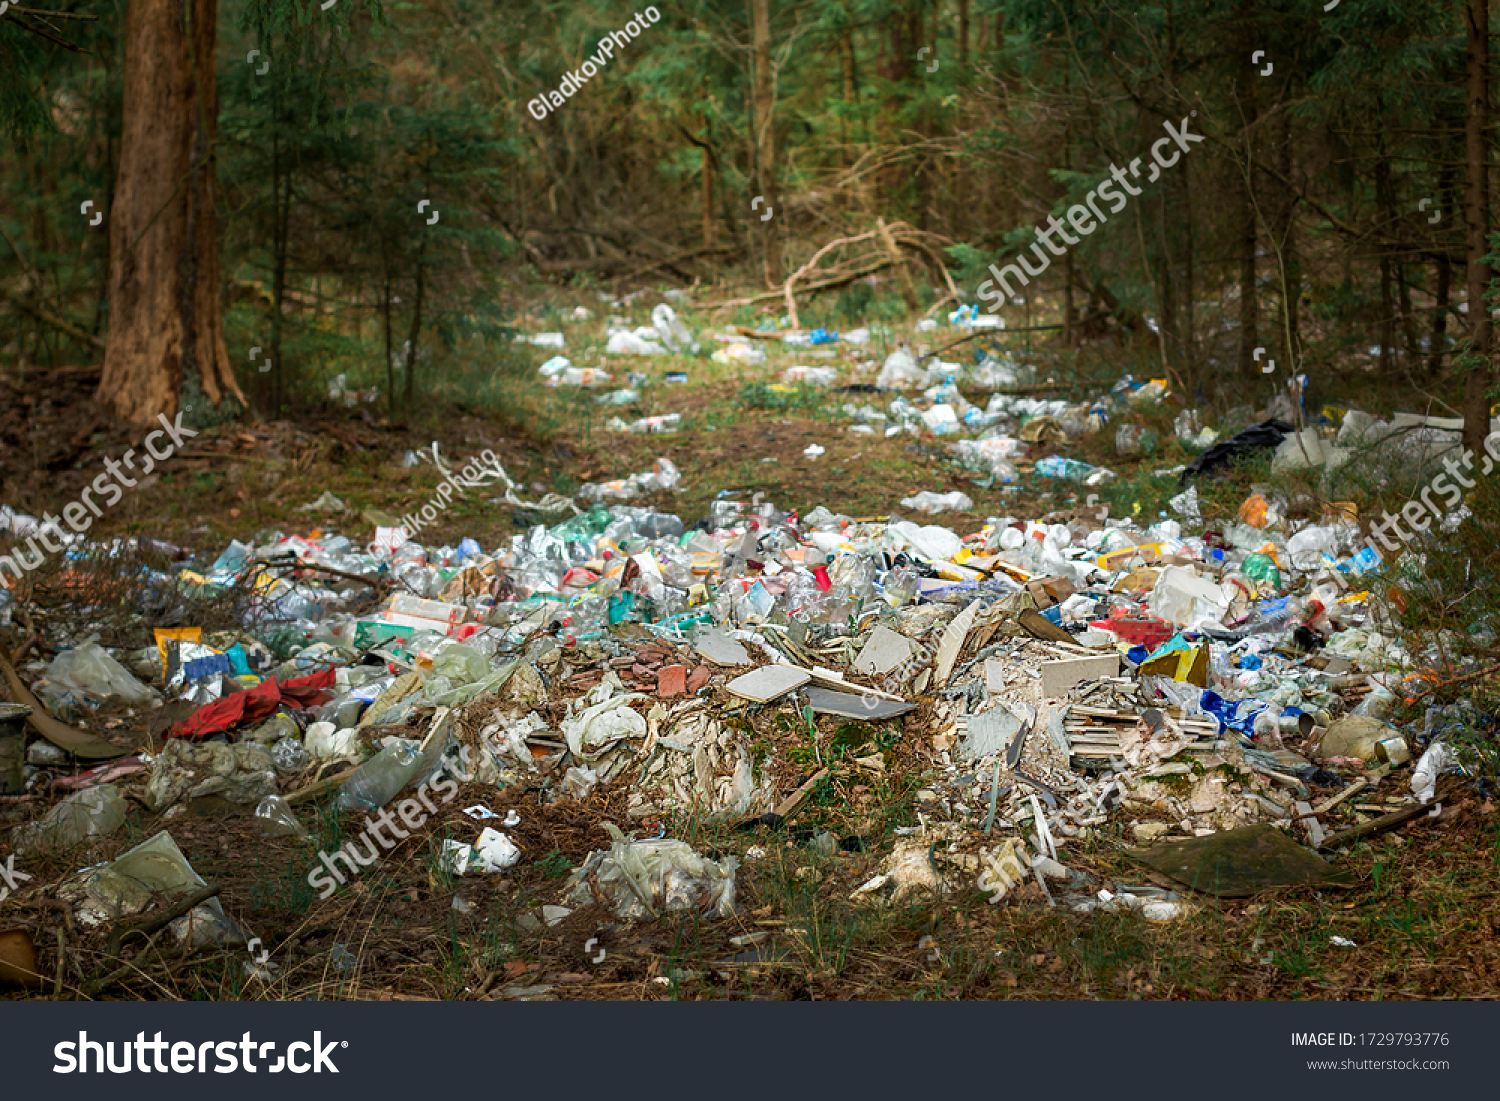 There is a lot of garbage in the forest. The concept of human pollution of forests and nature. A terrible dump in the woods. #1729793776